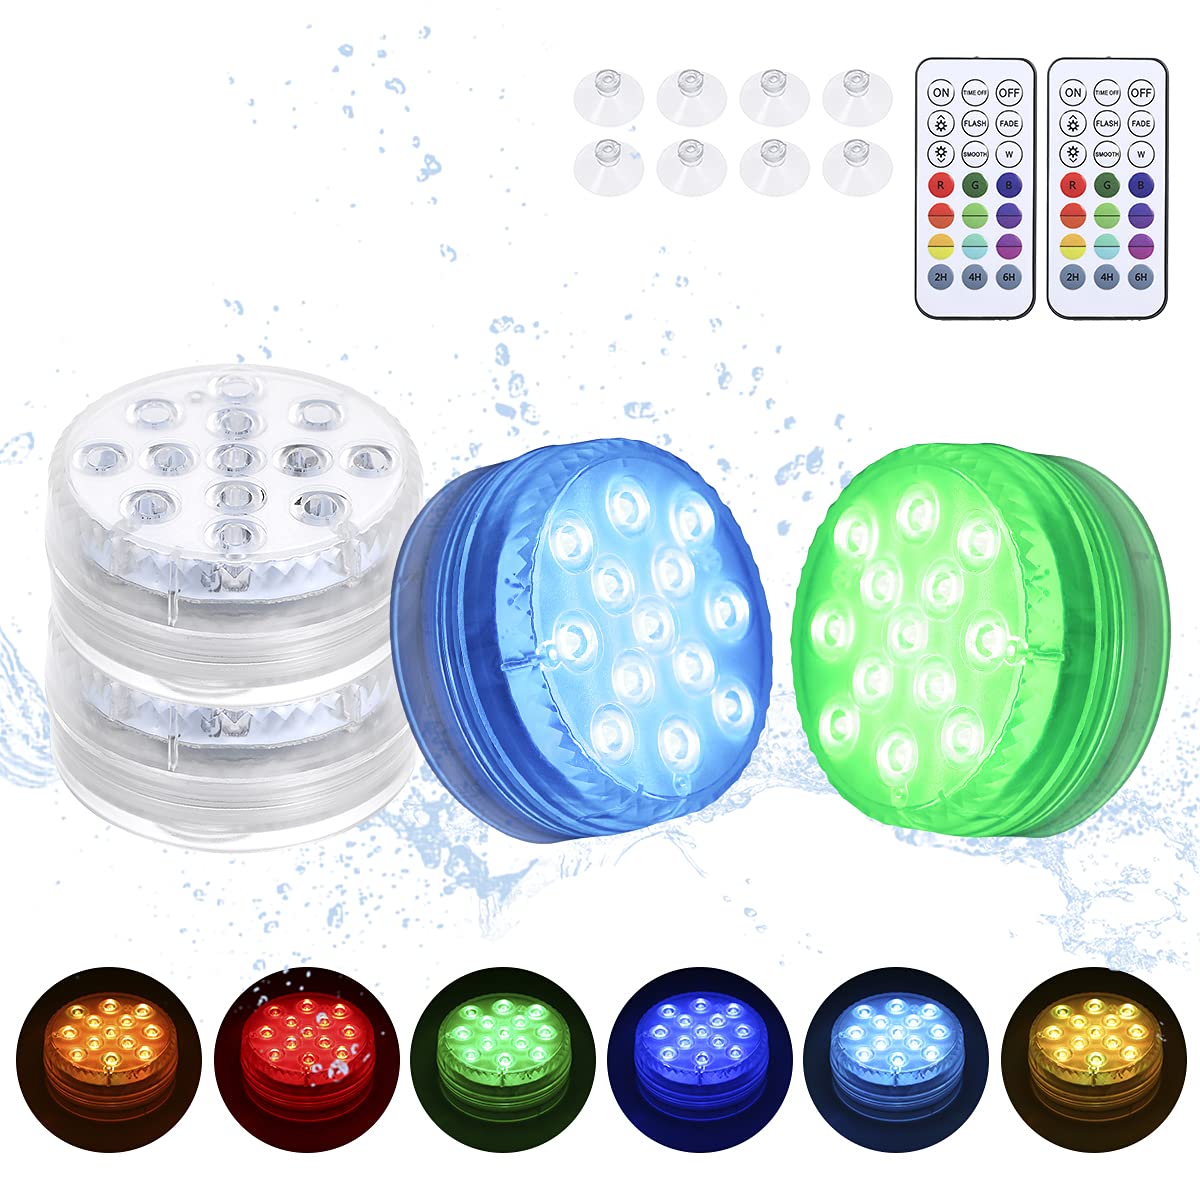 4 Pack Hot Tub Lights,IP68 Waterproof Pond Light 13 LED Beads 16 Colors Underwater Bath Lights with RF Remote Control & Magnetic & Suction Cups Submersible Led Light for Lazy Spa Pool